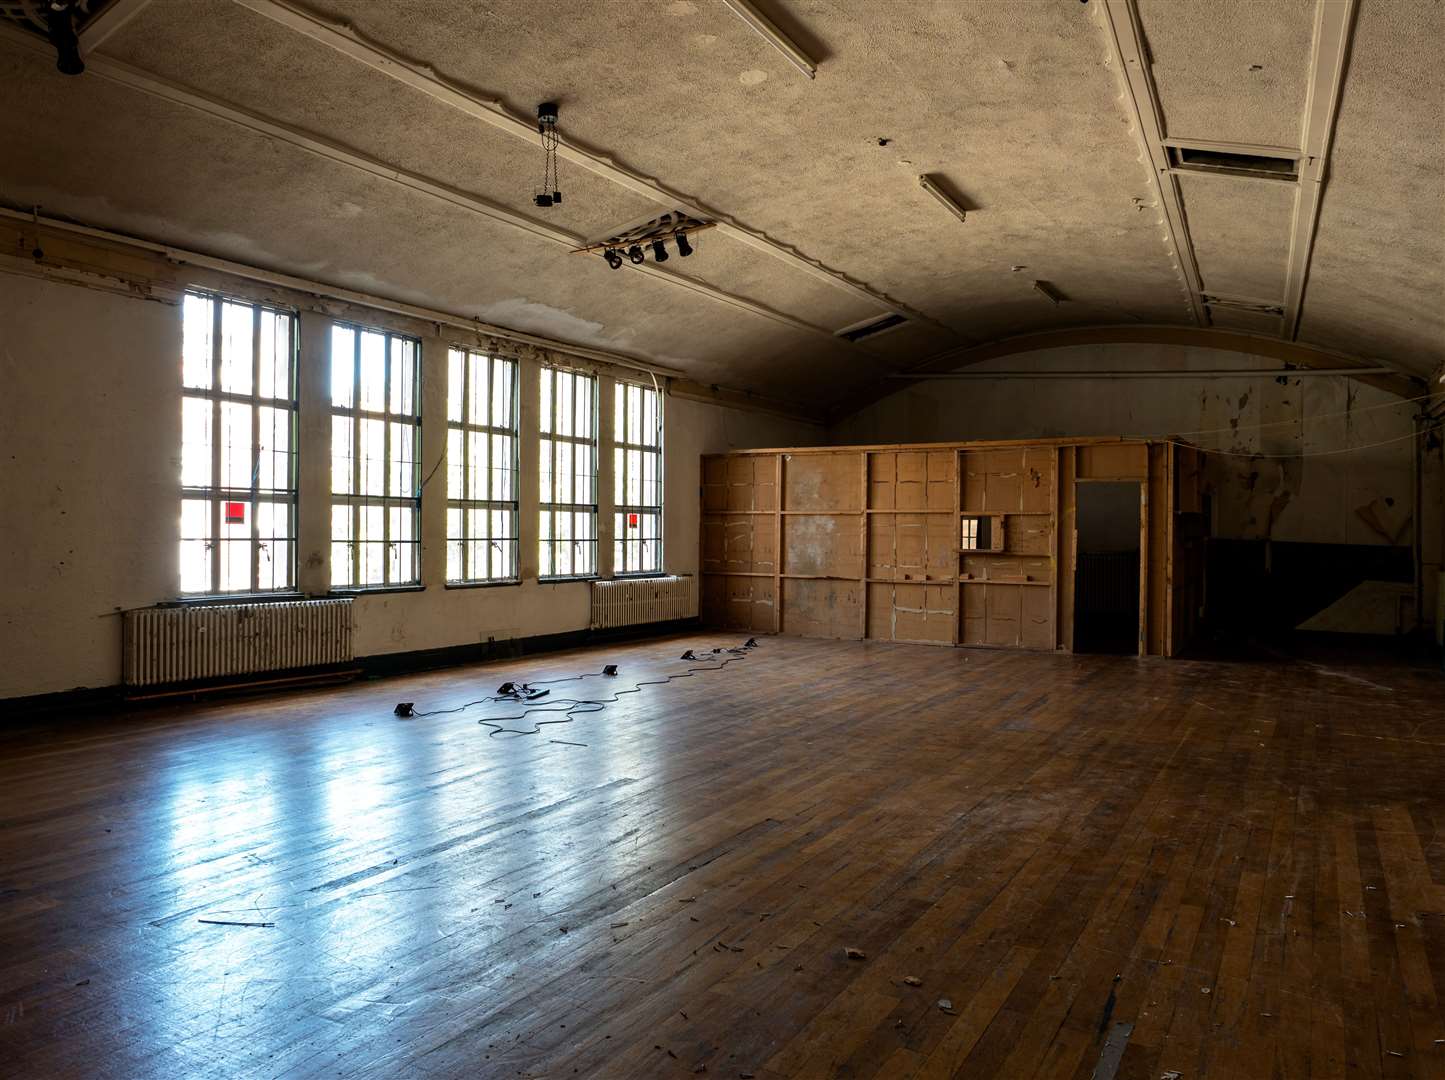 The former ballroom/cafe area on the first floor